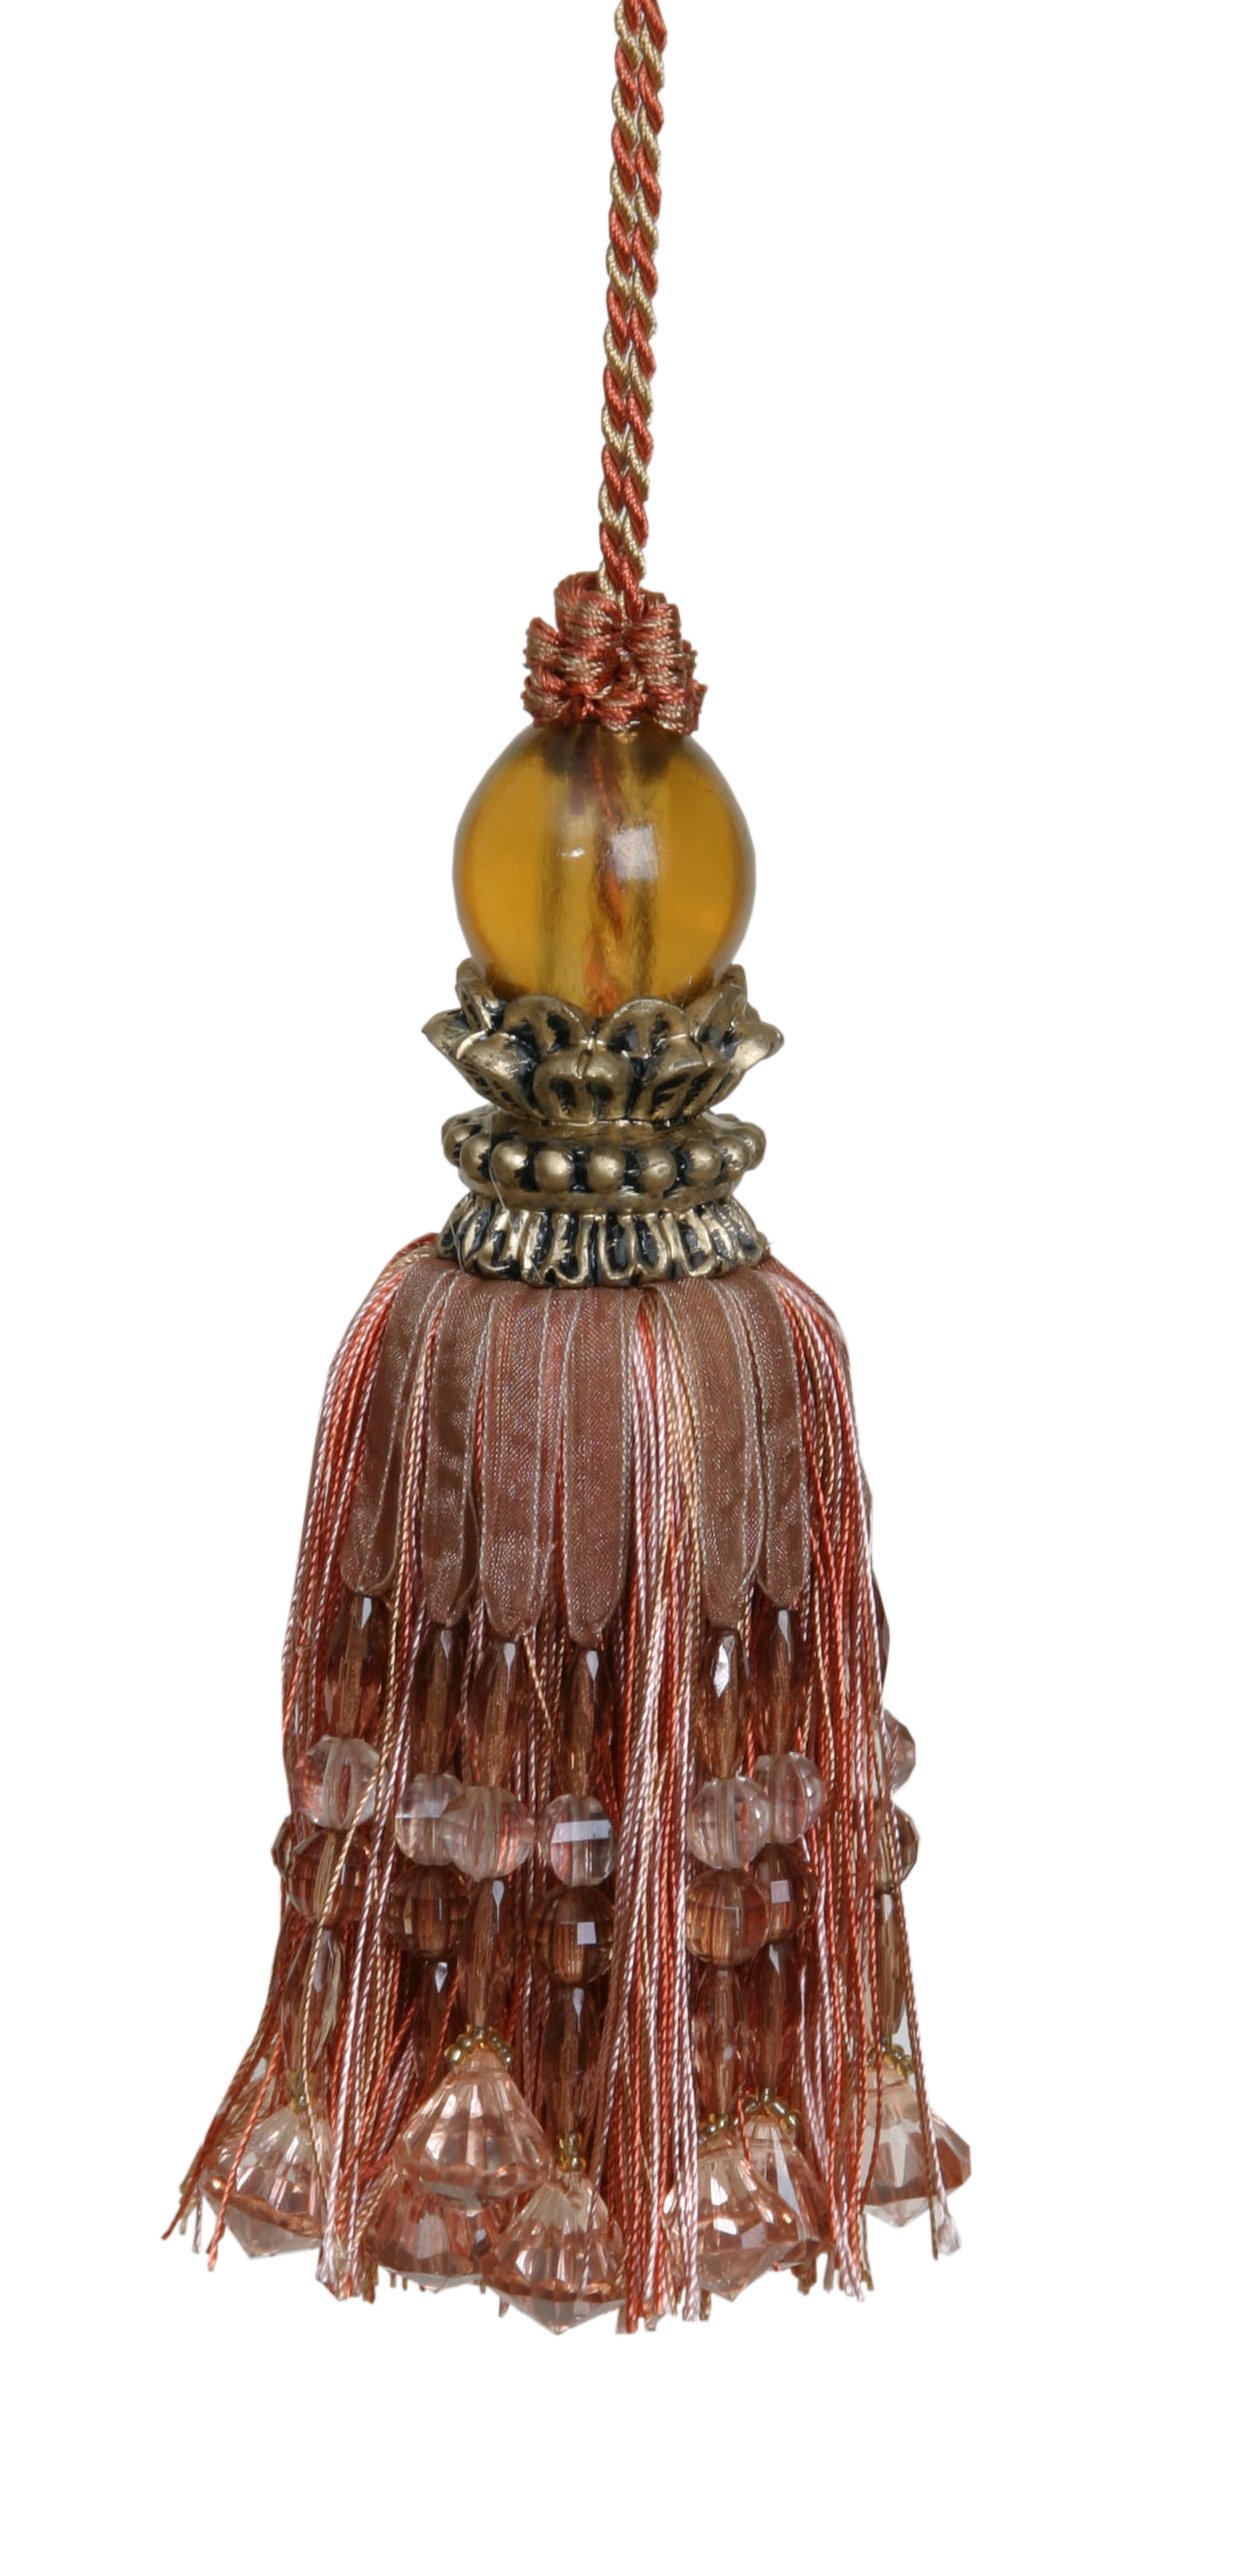 Tassel with Round Bead Fancy Top - Amber / Gold 18cm